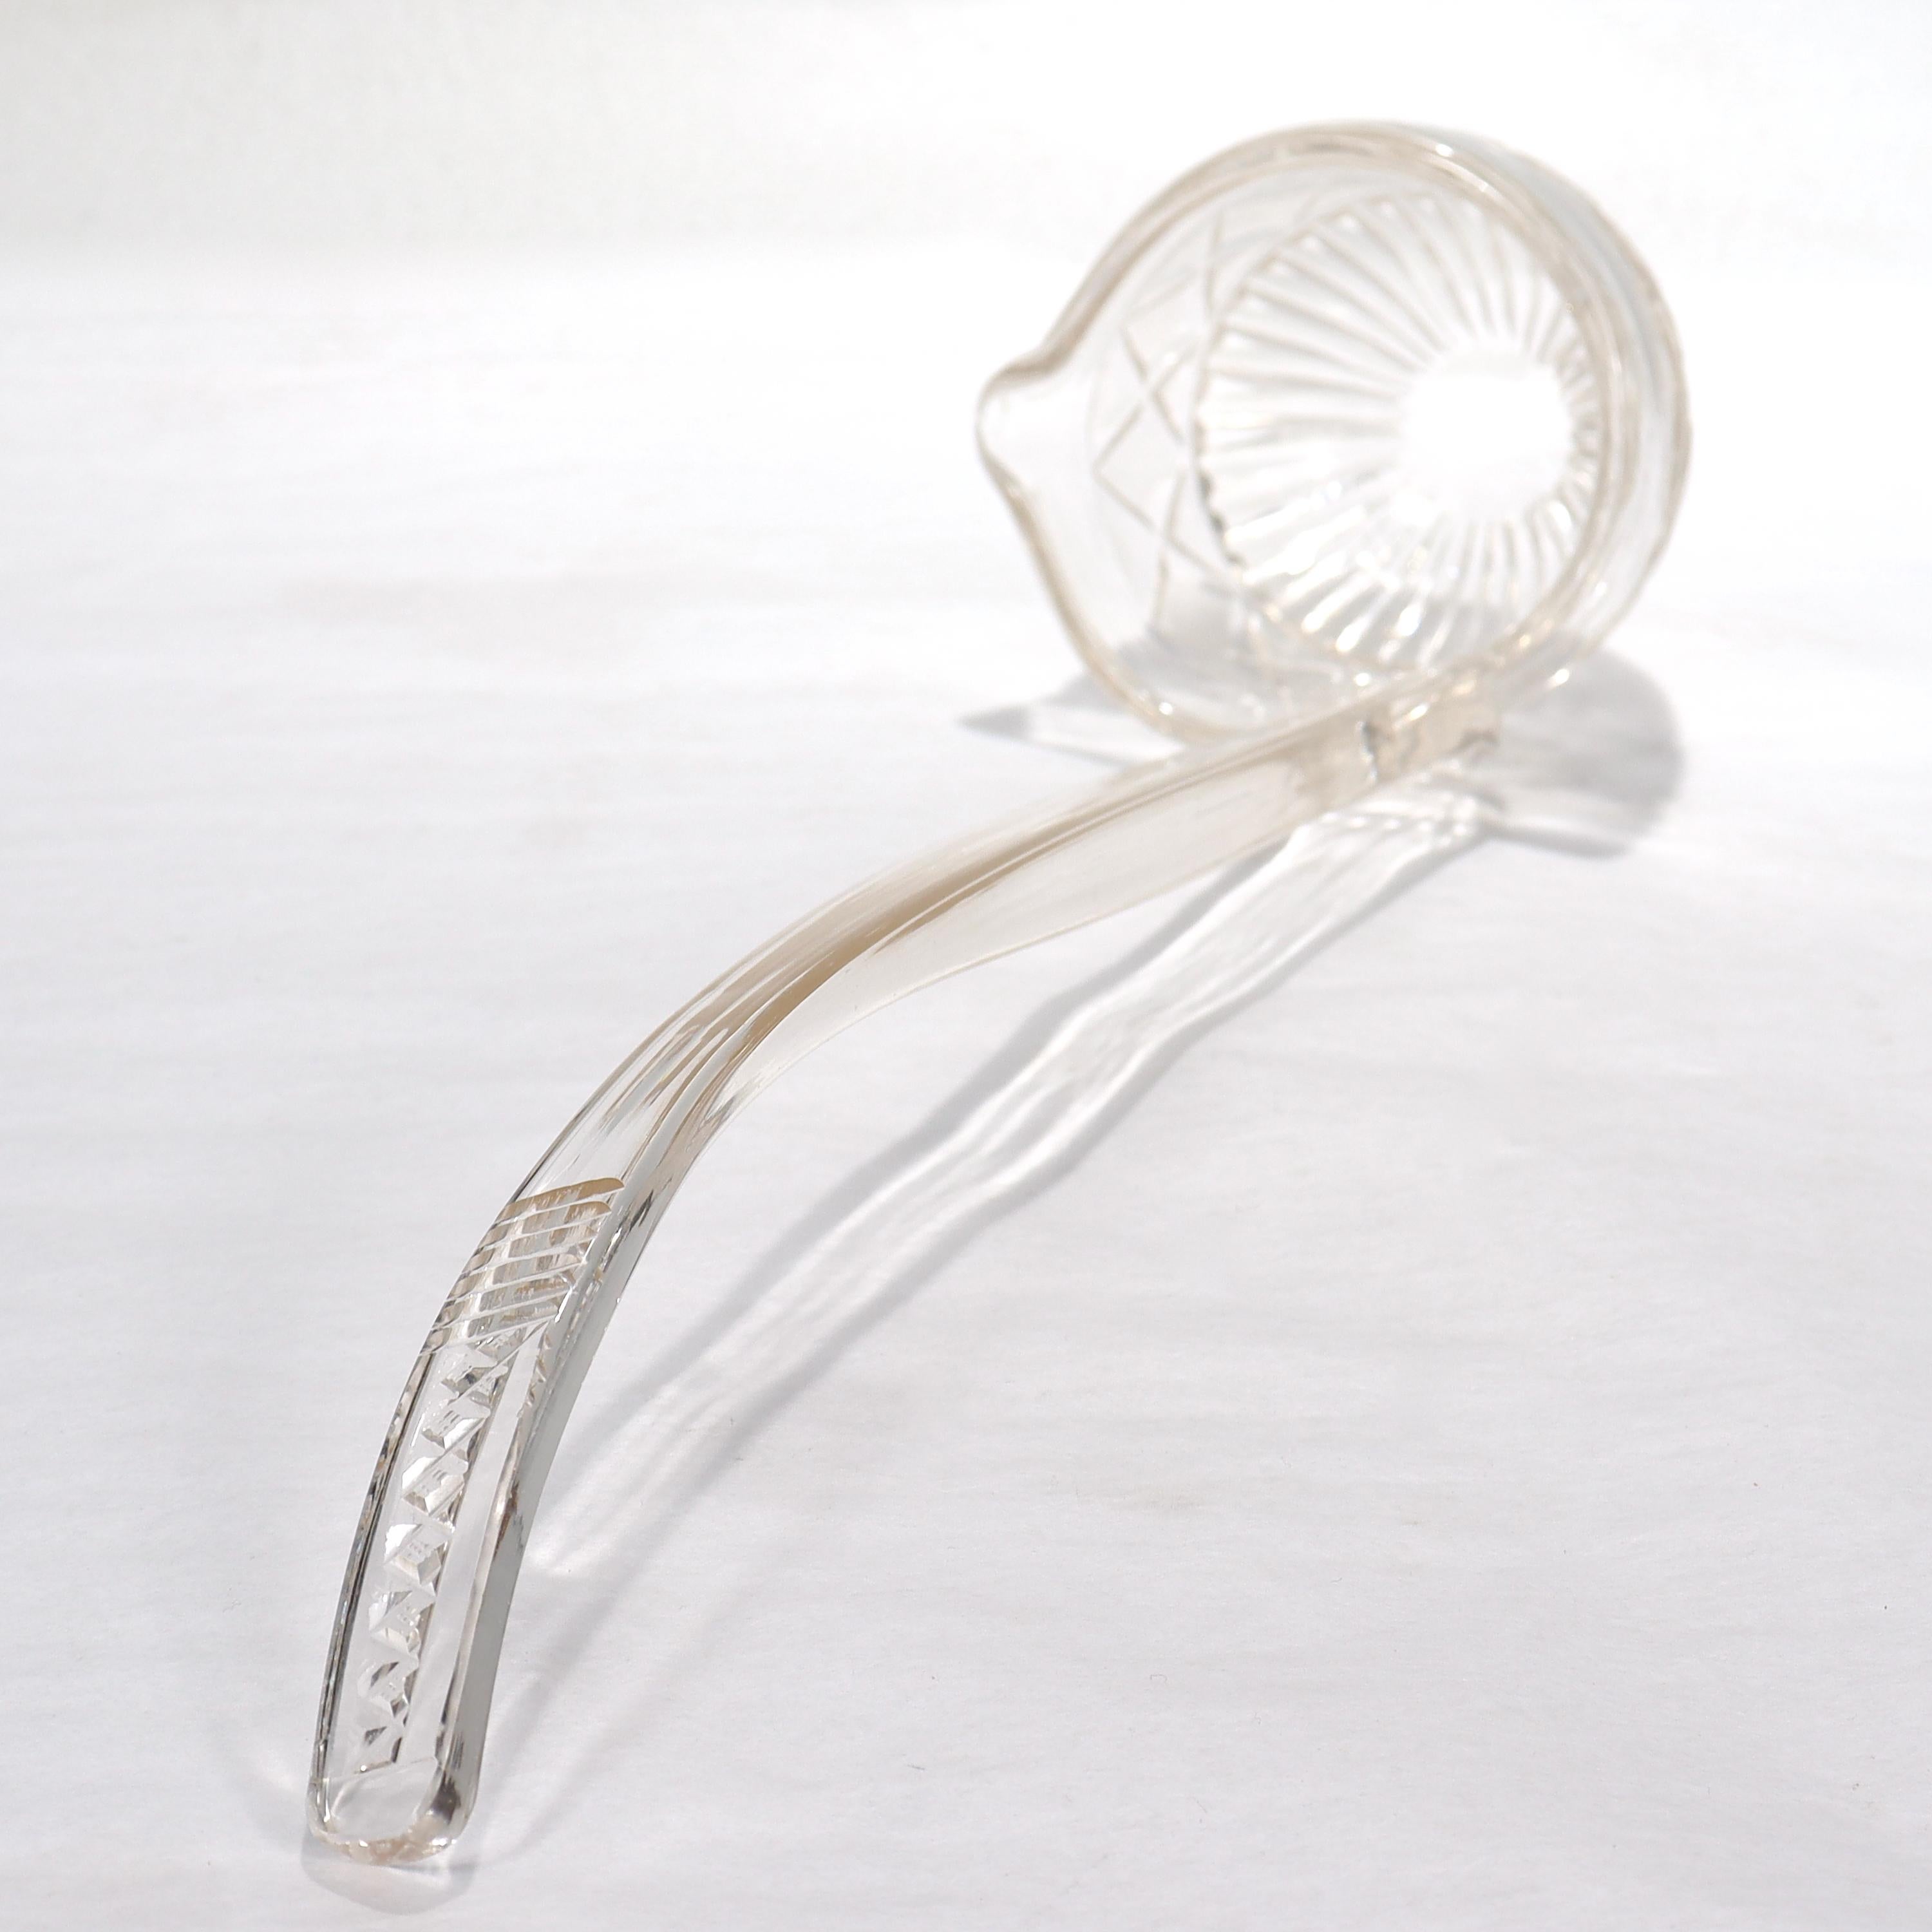 North American Rare Antique 19th Century Cut Glass Punch Ladle For Sale